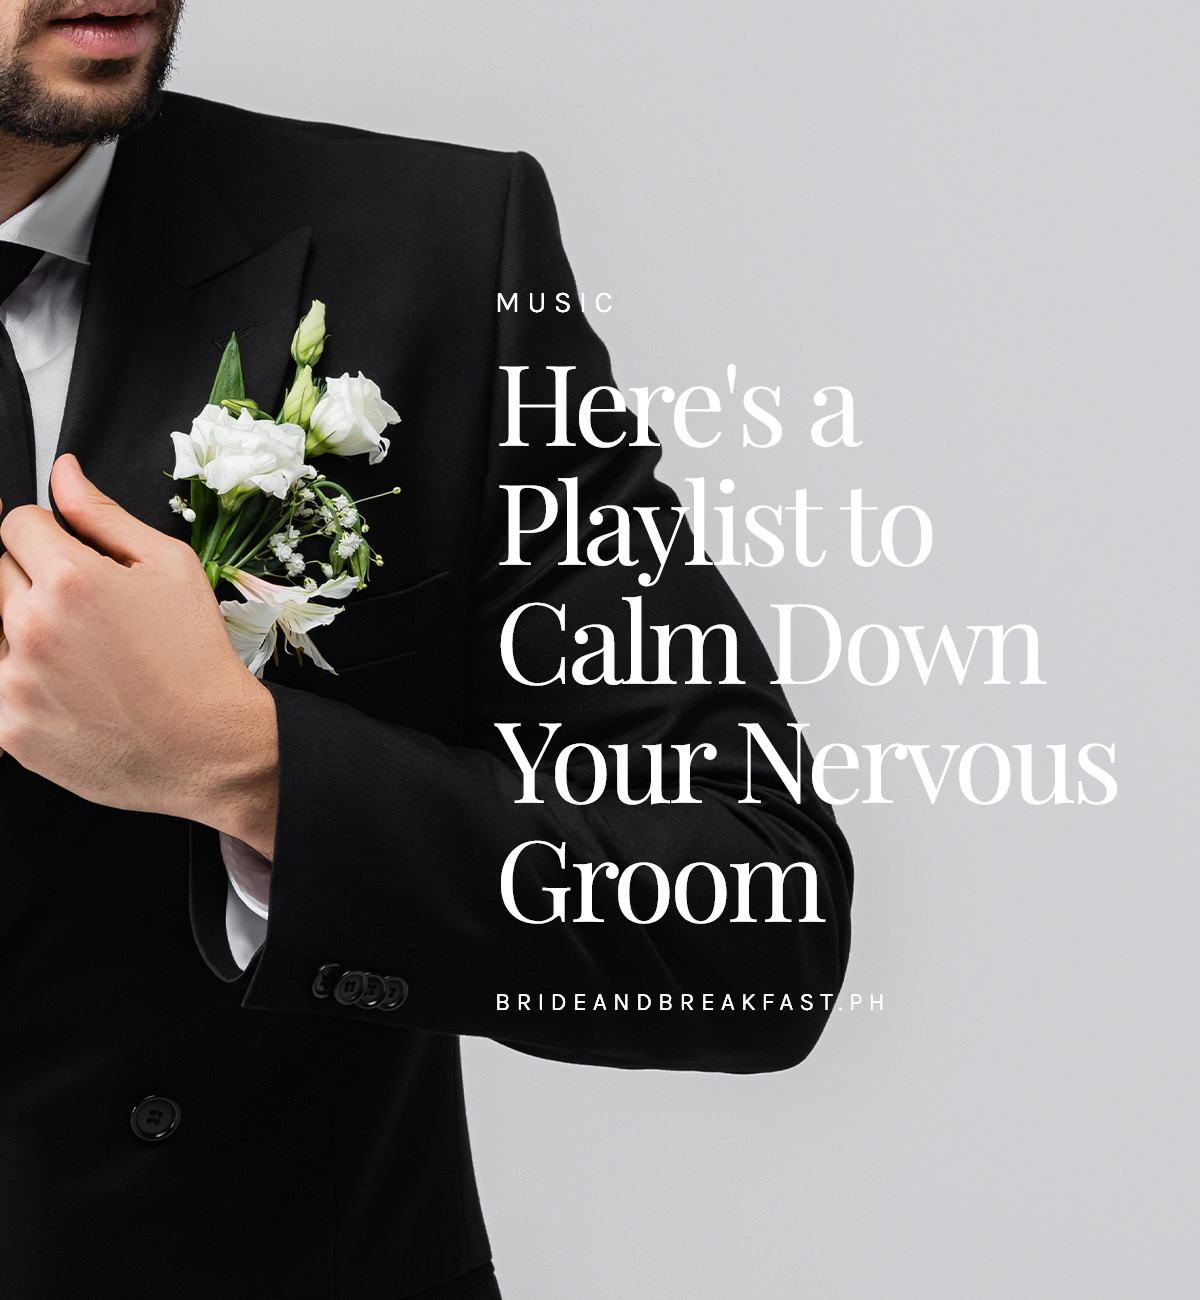 Here's a Playlist to Calm Down Your Nervous Groom